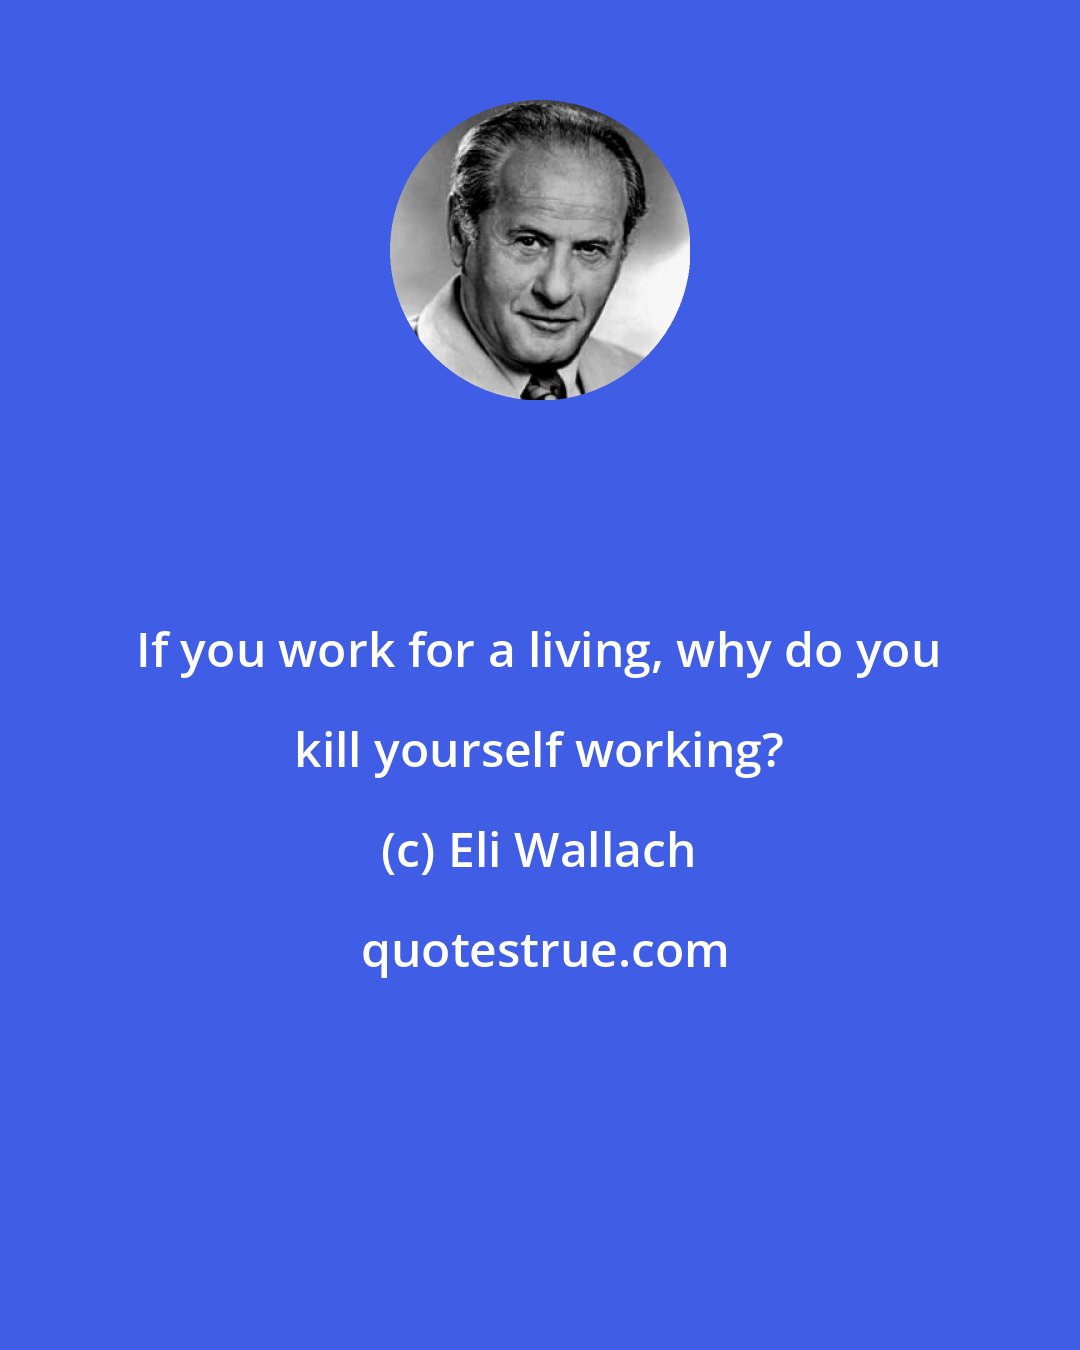 Eli Wallach: If you work for a living, why do you kill yourself working?